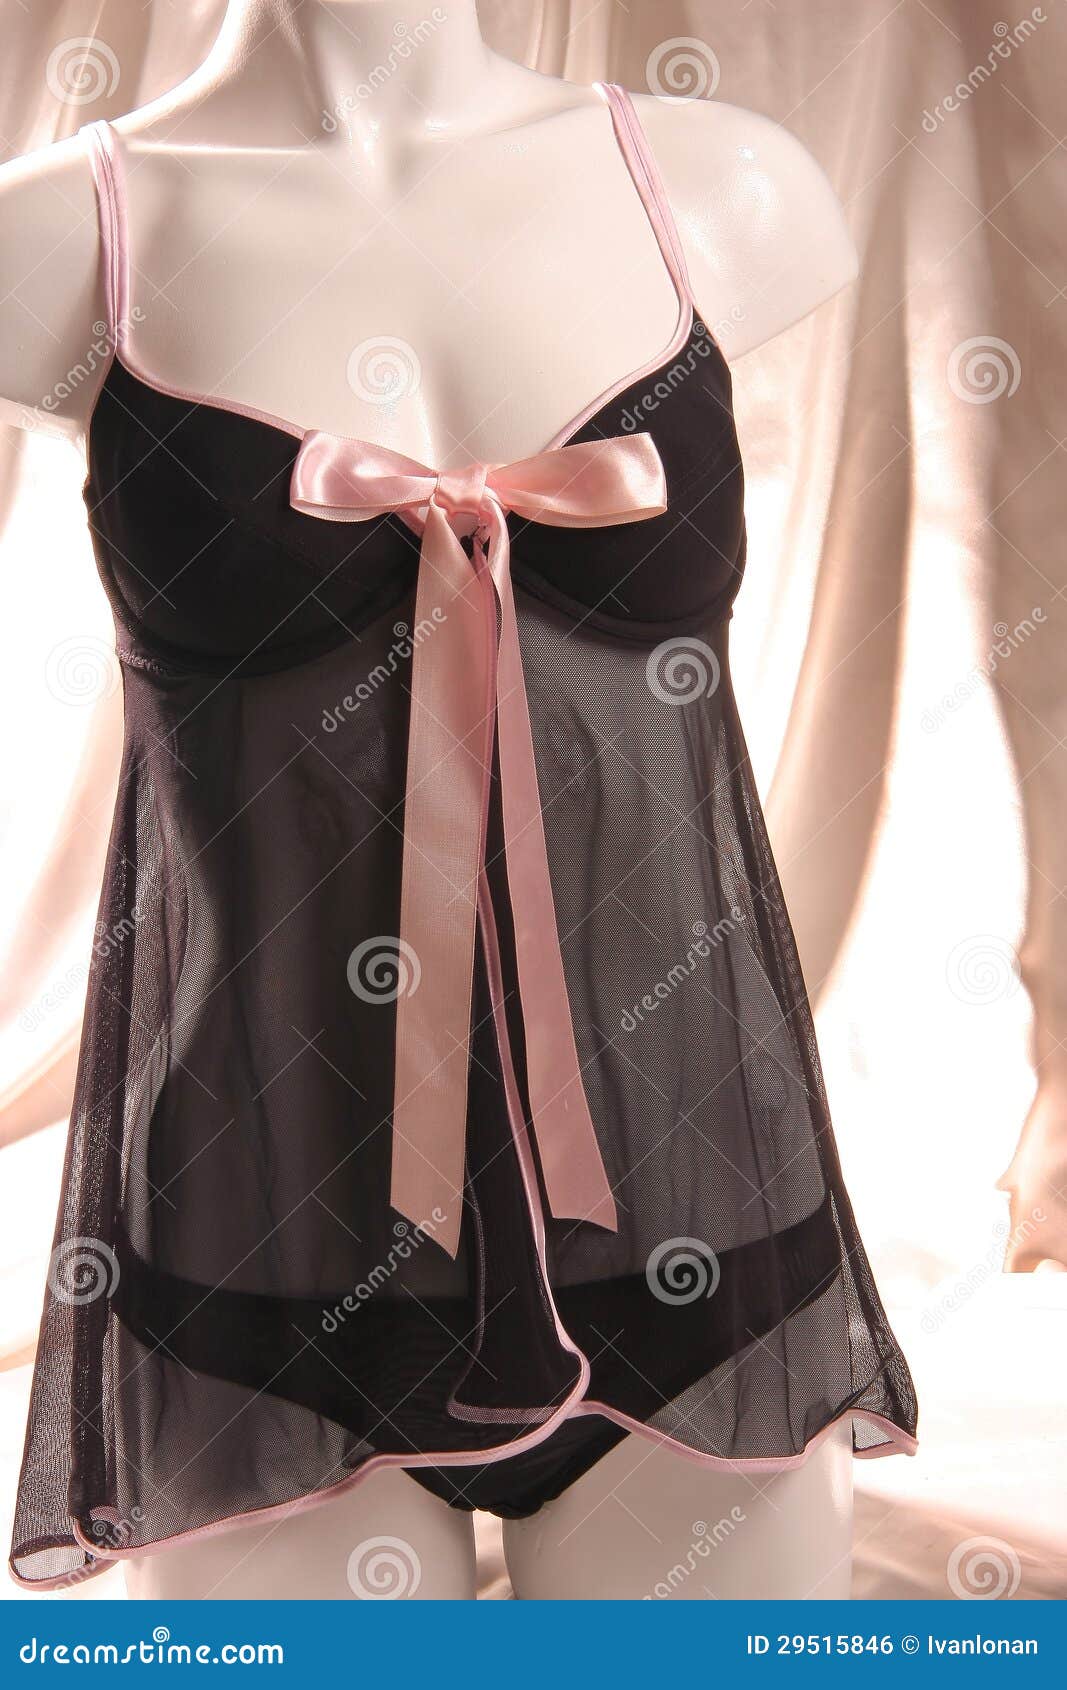 Mannequin with Lingerie stock photo. Image of model, honeysuckle